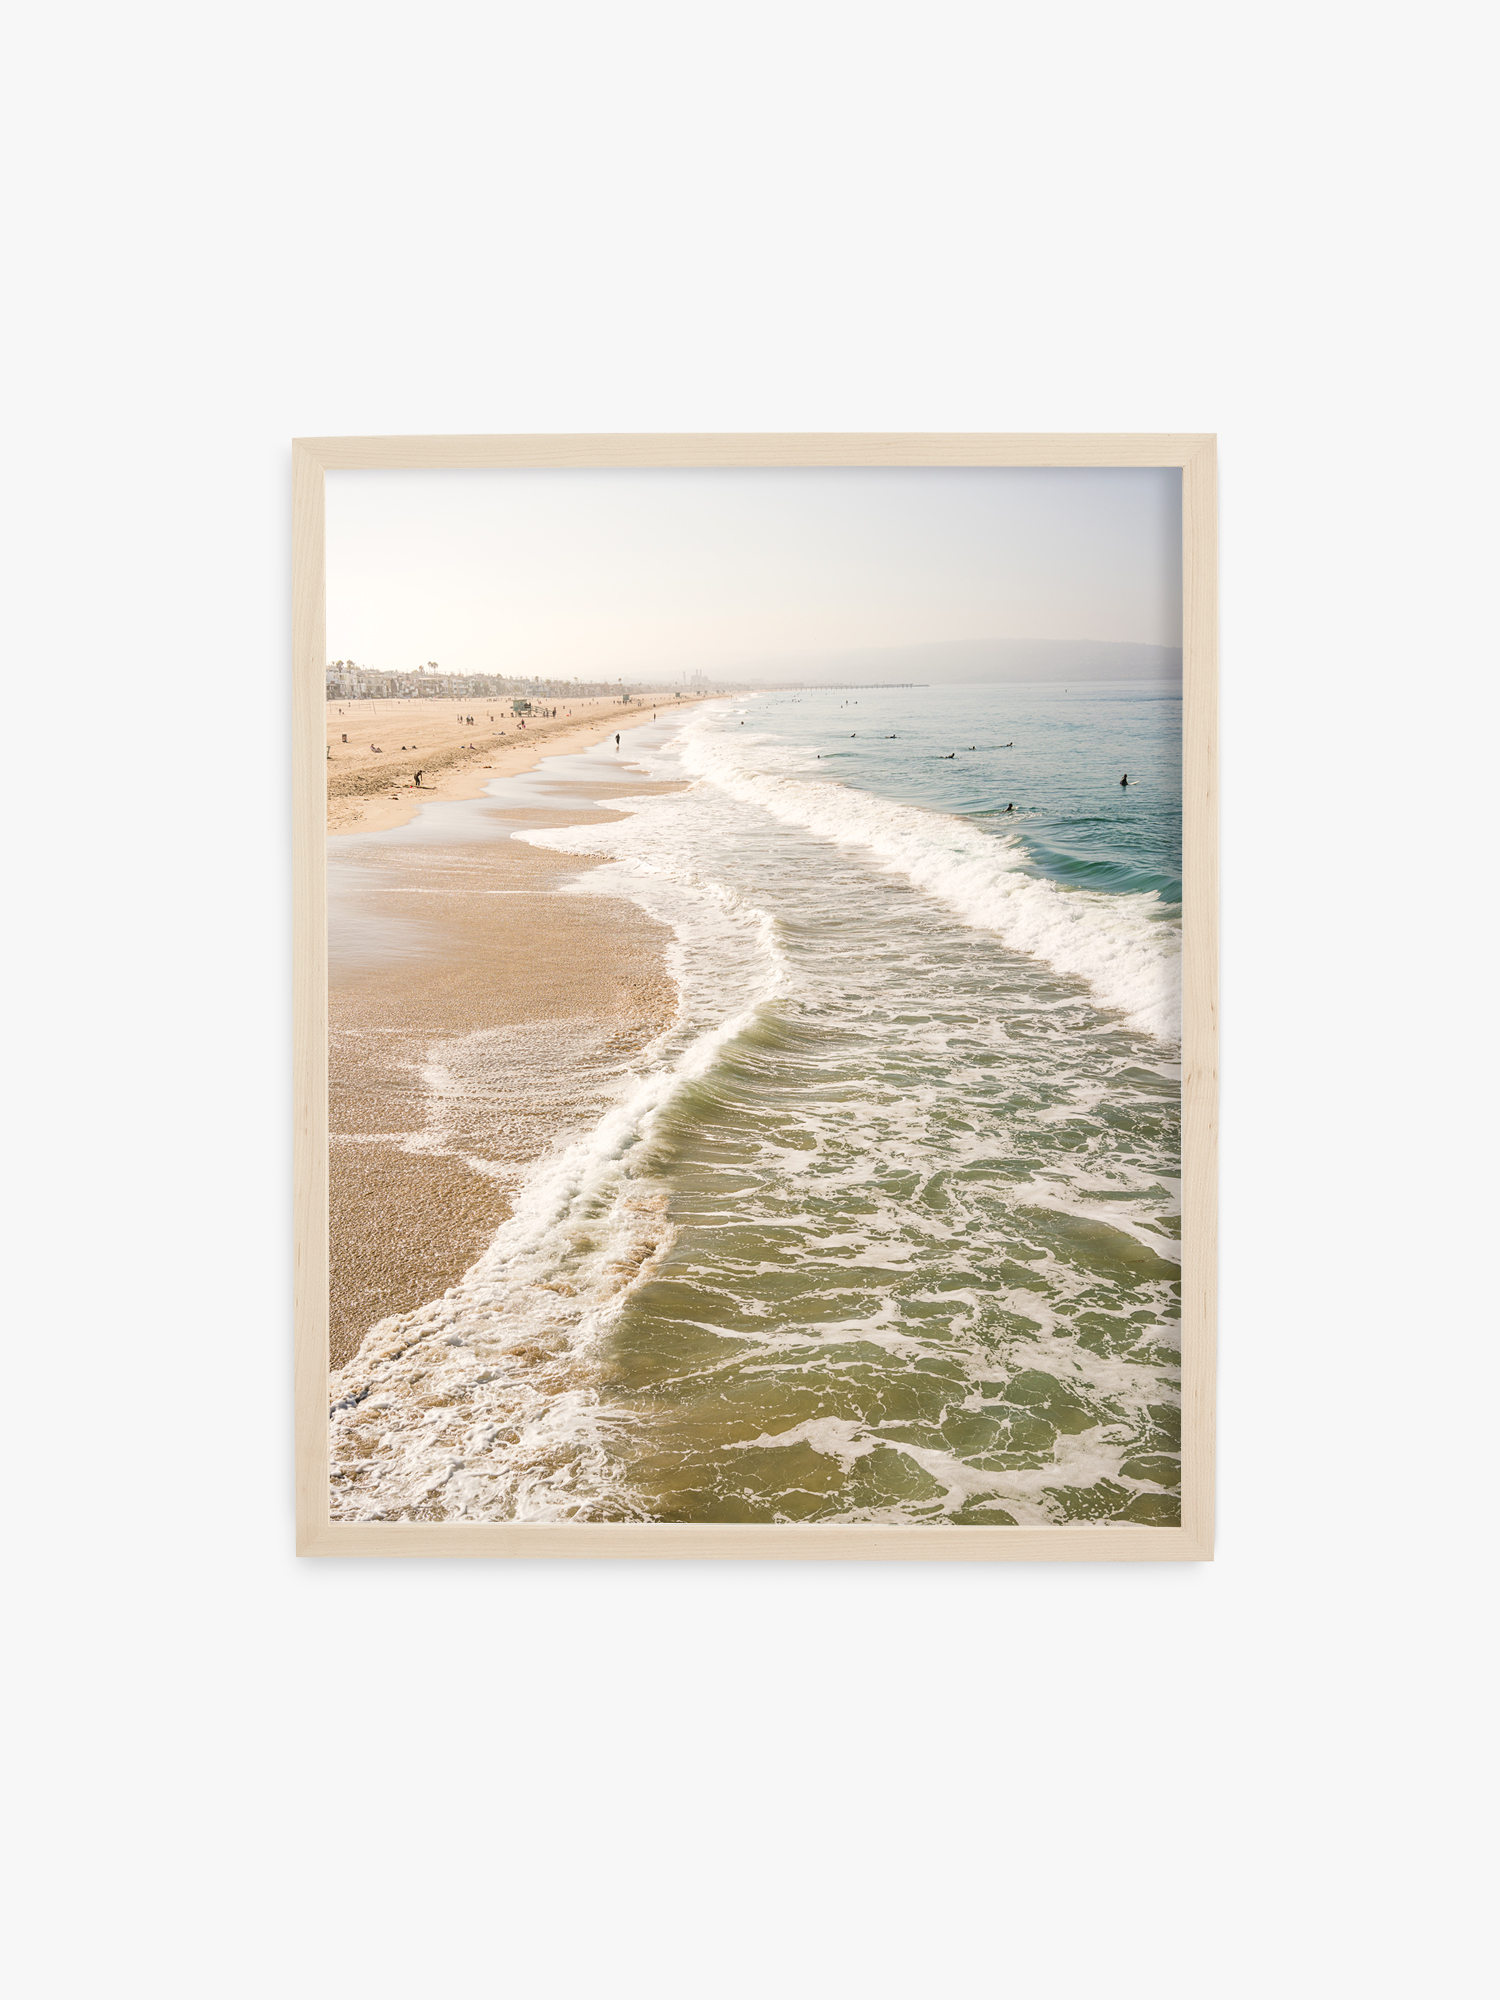 Manhattan Beach Waves - Available as a Print or Framed in White, Black or Natural Wood. Comes in frames 8x10 up to 30x40